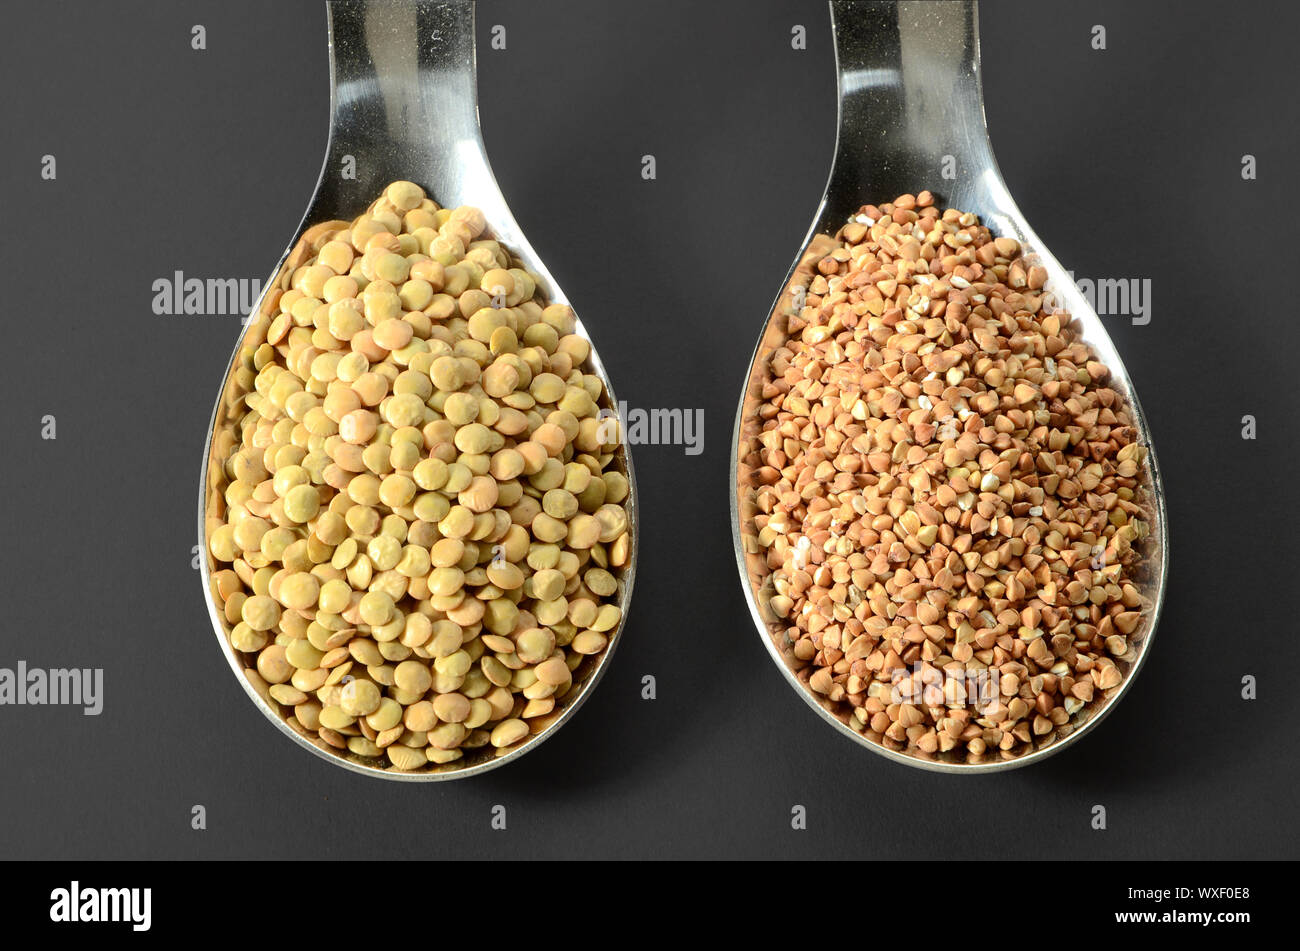 Lentils and buckwheat raw in a spoon on a dark textured background. Stock Photo